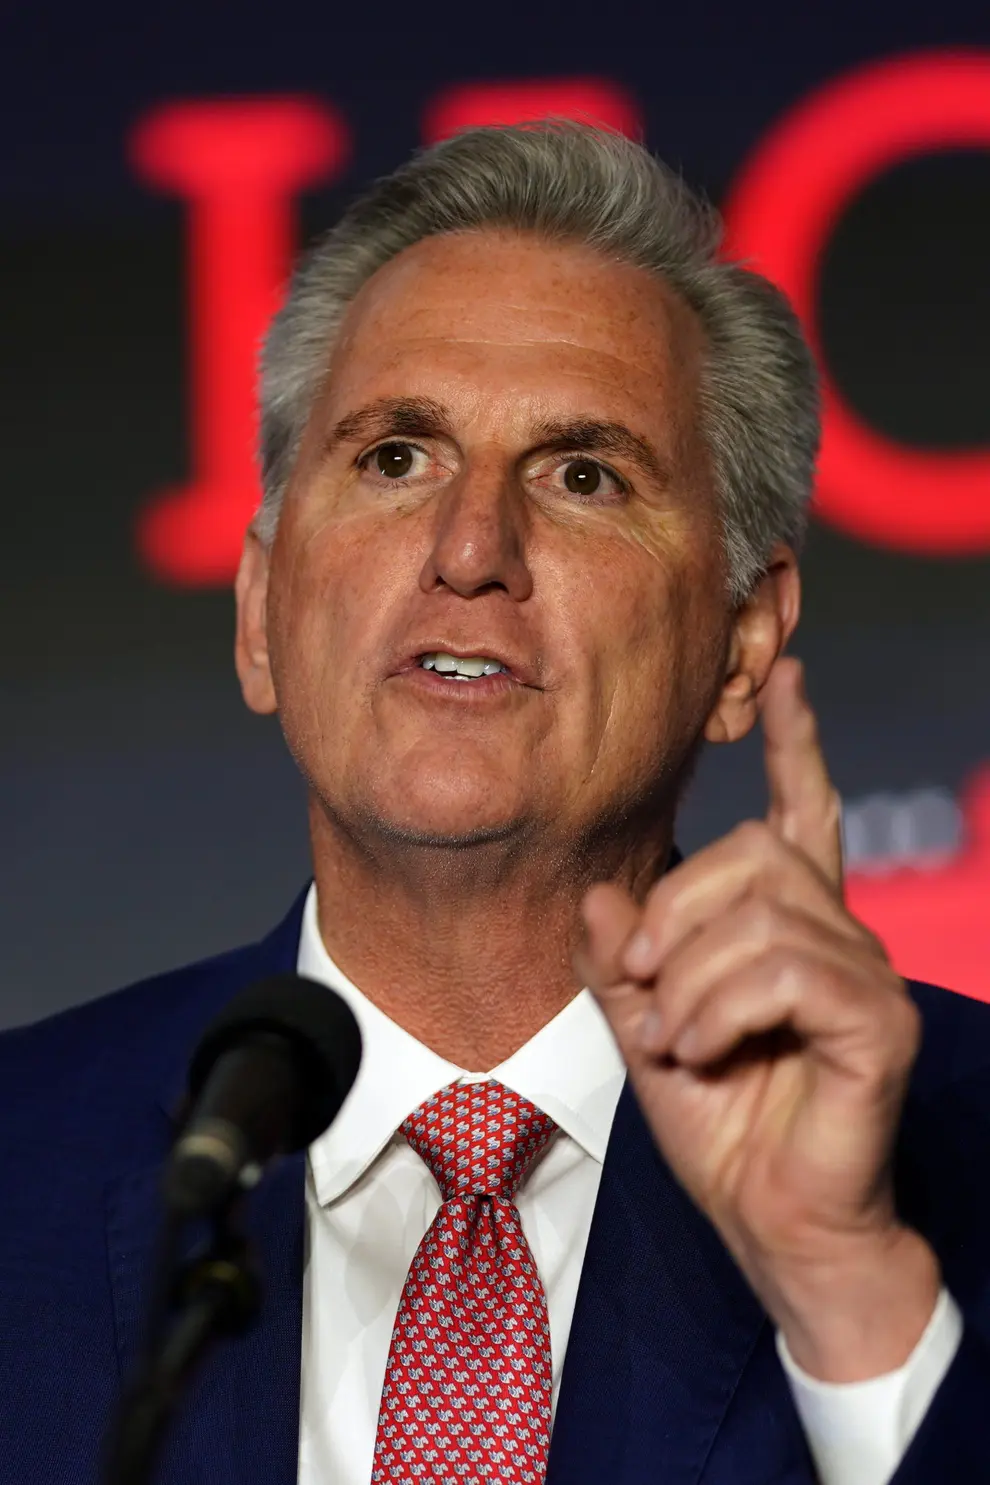 Washington Dc (United States), 10/11/2022.- House Minority Leader Rep. Kevin McCarthy (R) speaks at at an election night party at the Westin Hotel in Washington, DC, USA, 09 November 2022. The US midterm elections are held every four years at the midpoint of each presidential term and this year include elections for all 435 seats in the House of Representatives, 35 of the 100 seats in the Senate and 36 of the 50 state governors as well as numerous other local seats and ballot issues. (Elecciones, Estados Unidos) EFE/EPA/WILL OLIVER USA MIDTERM ELECTIONS